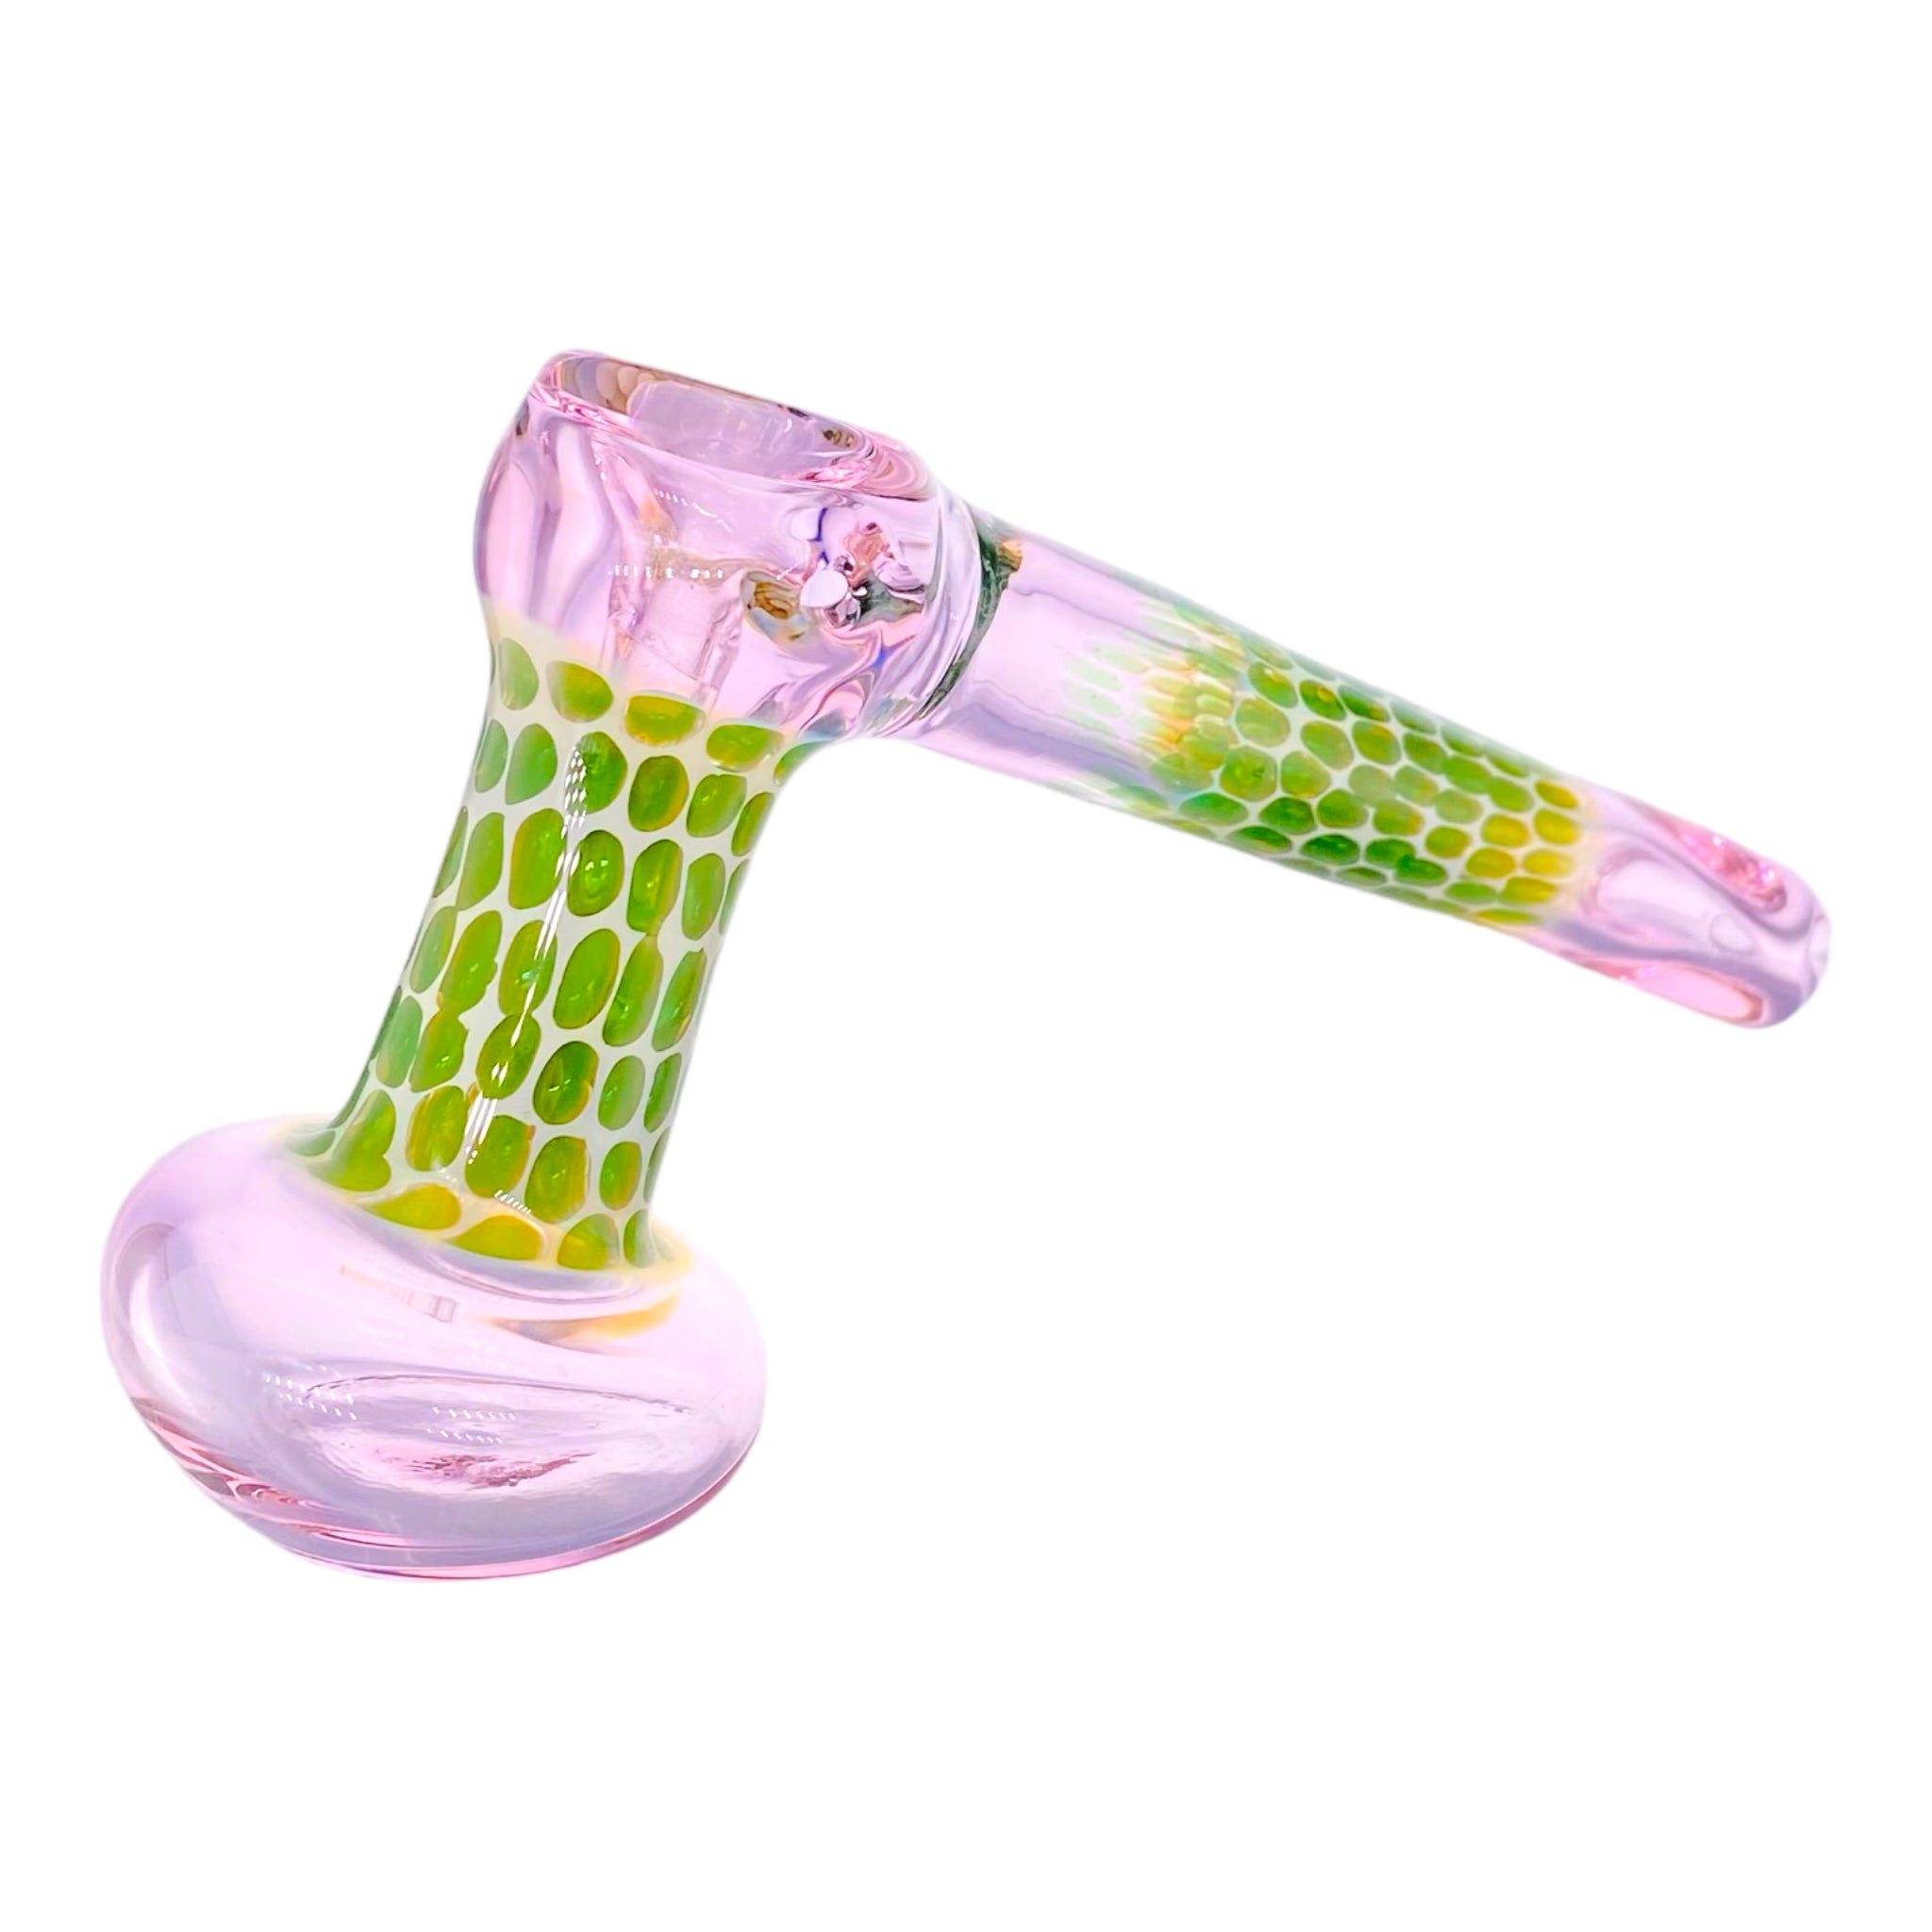 og push bowl bubbler Pink And Green Dot Stack Laydown Glass Bubbler Water Pipe